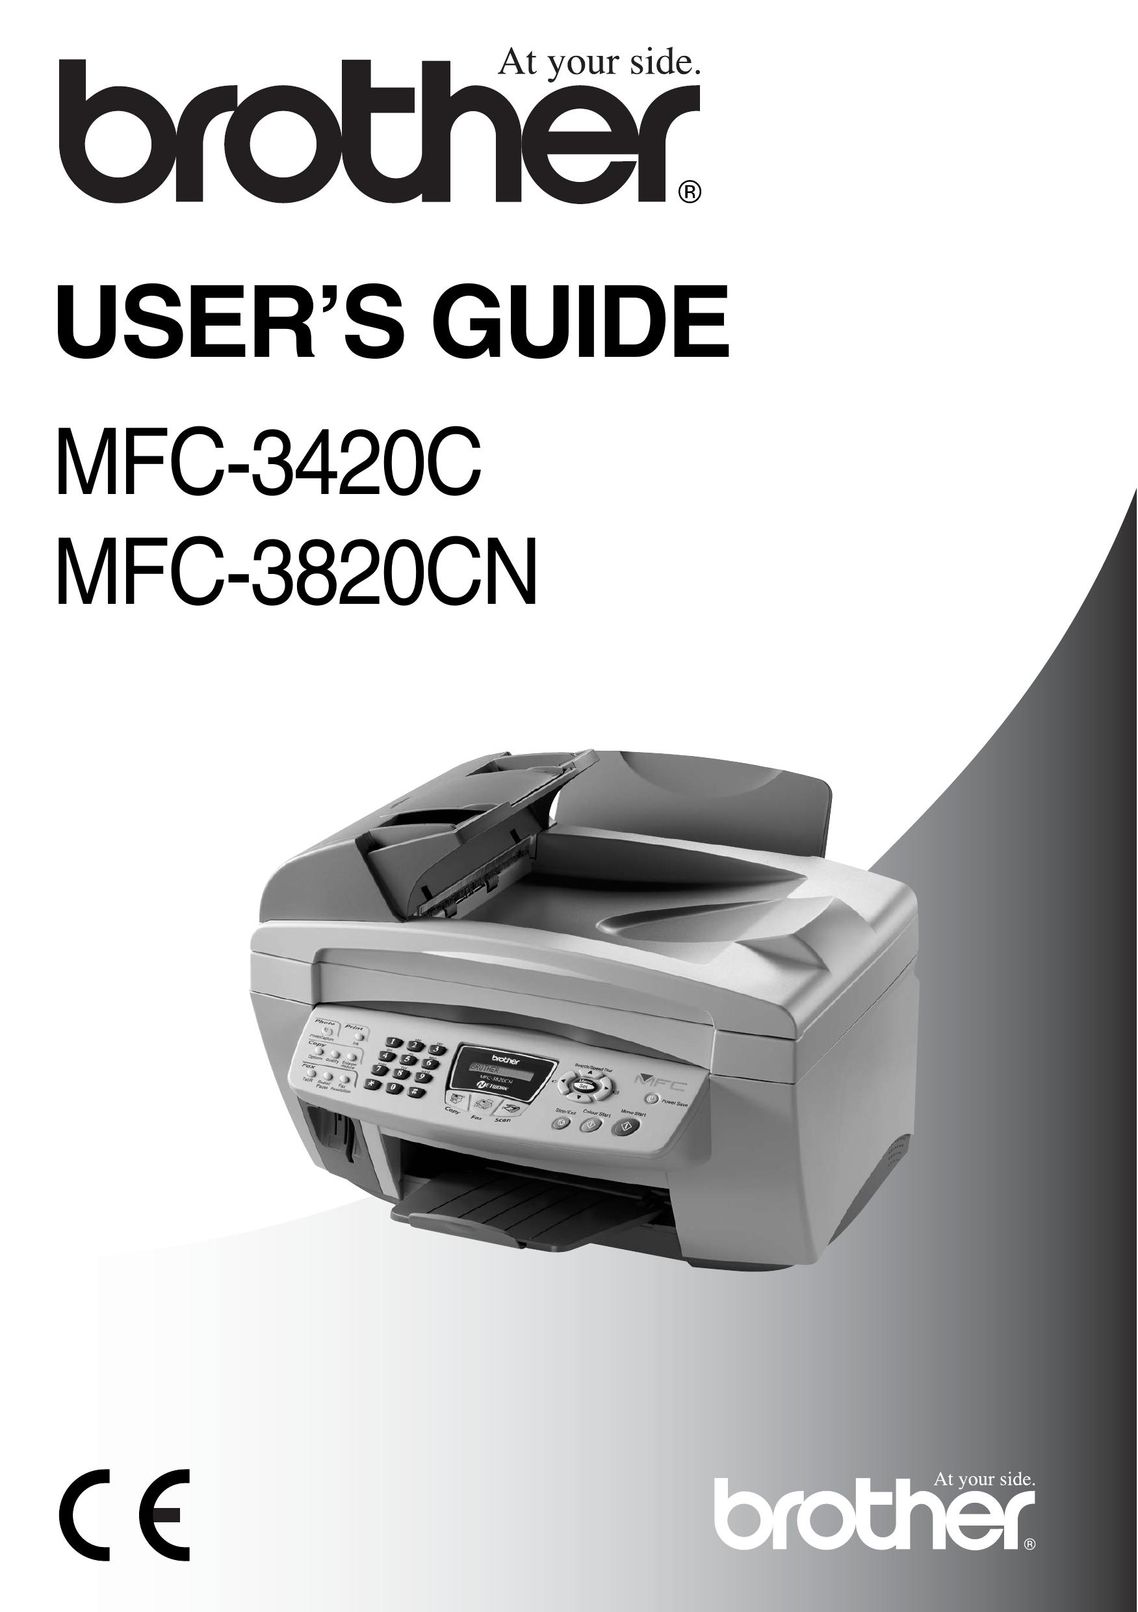 Nordic Star Products MFC-3420C All in One Printer User Manual